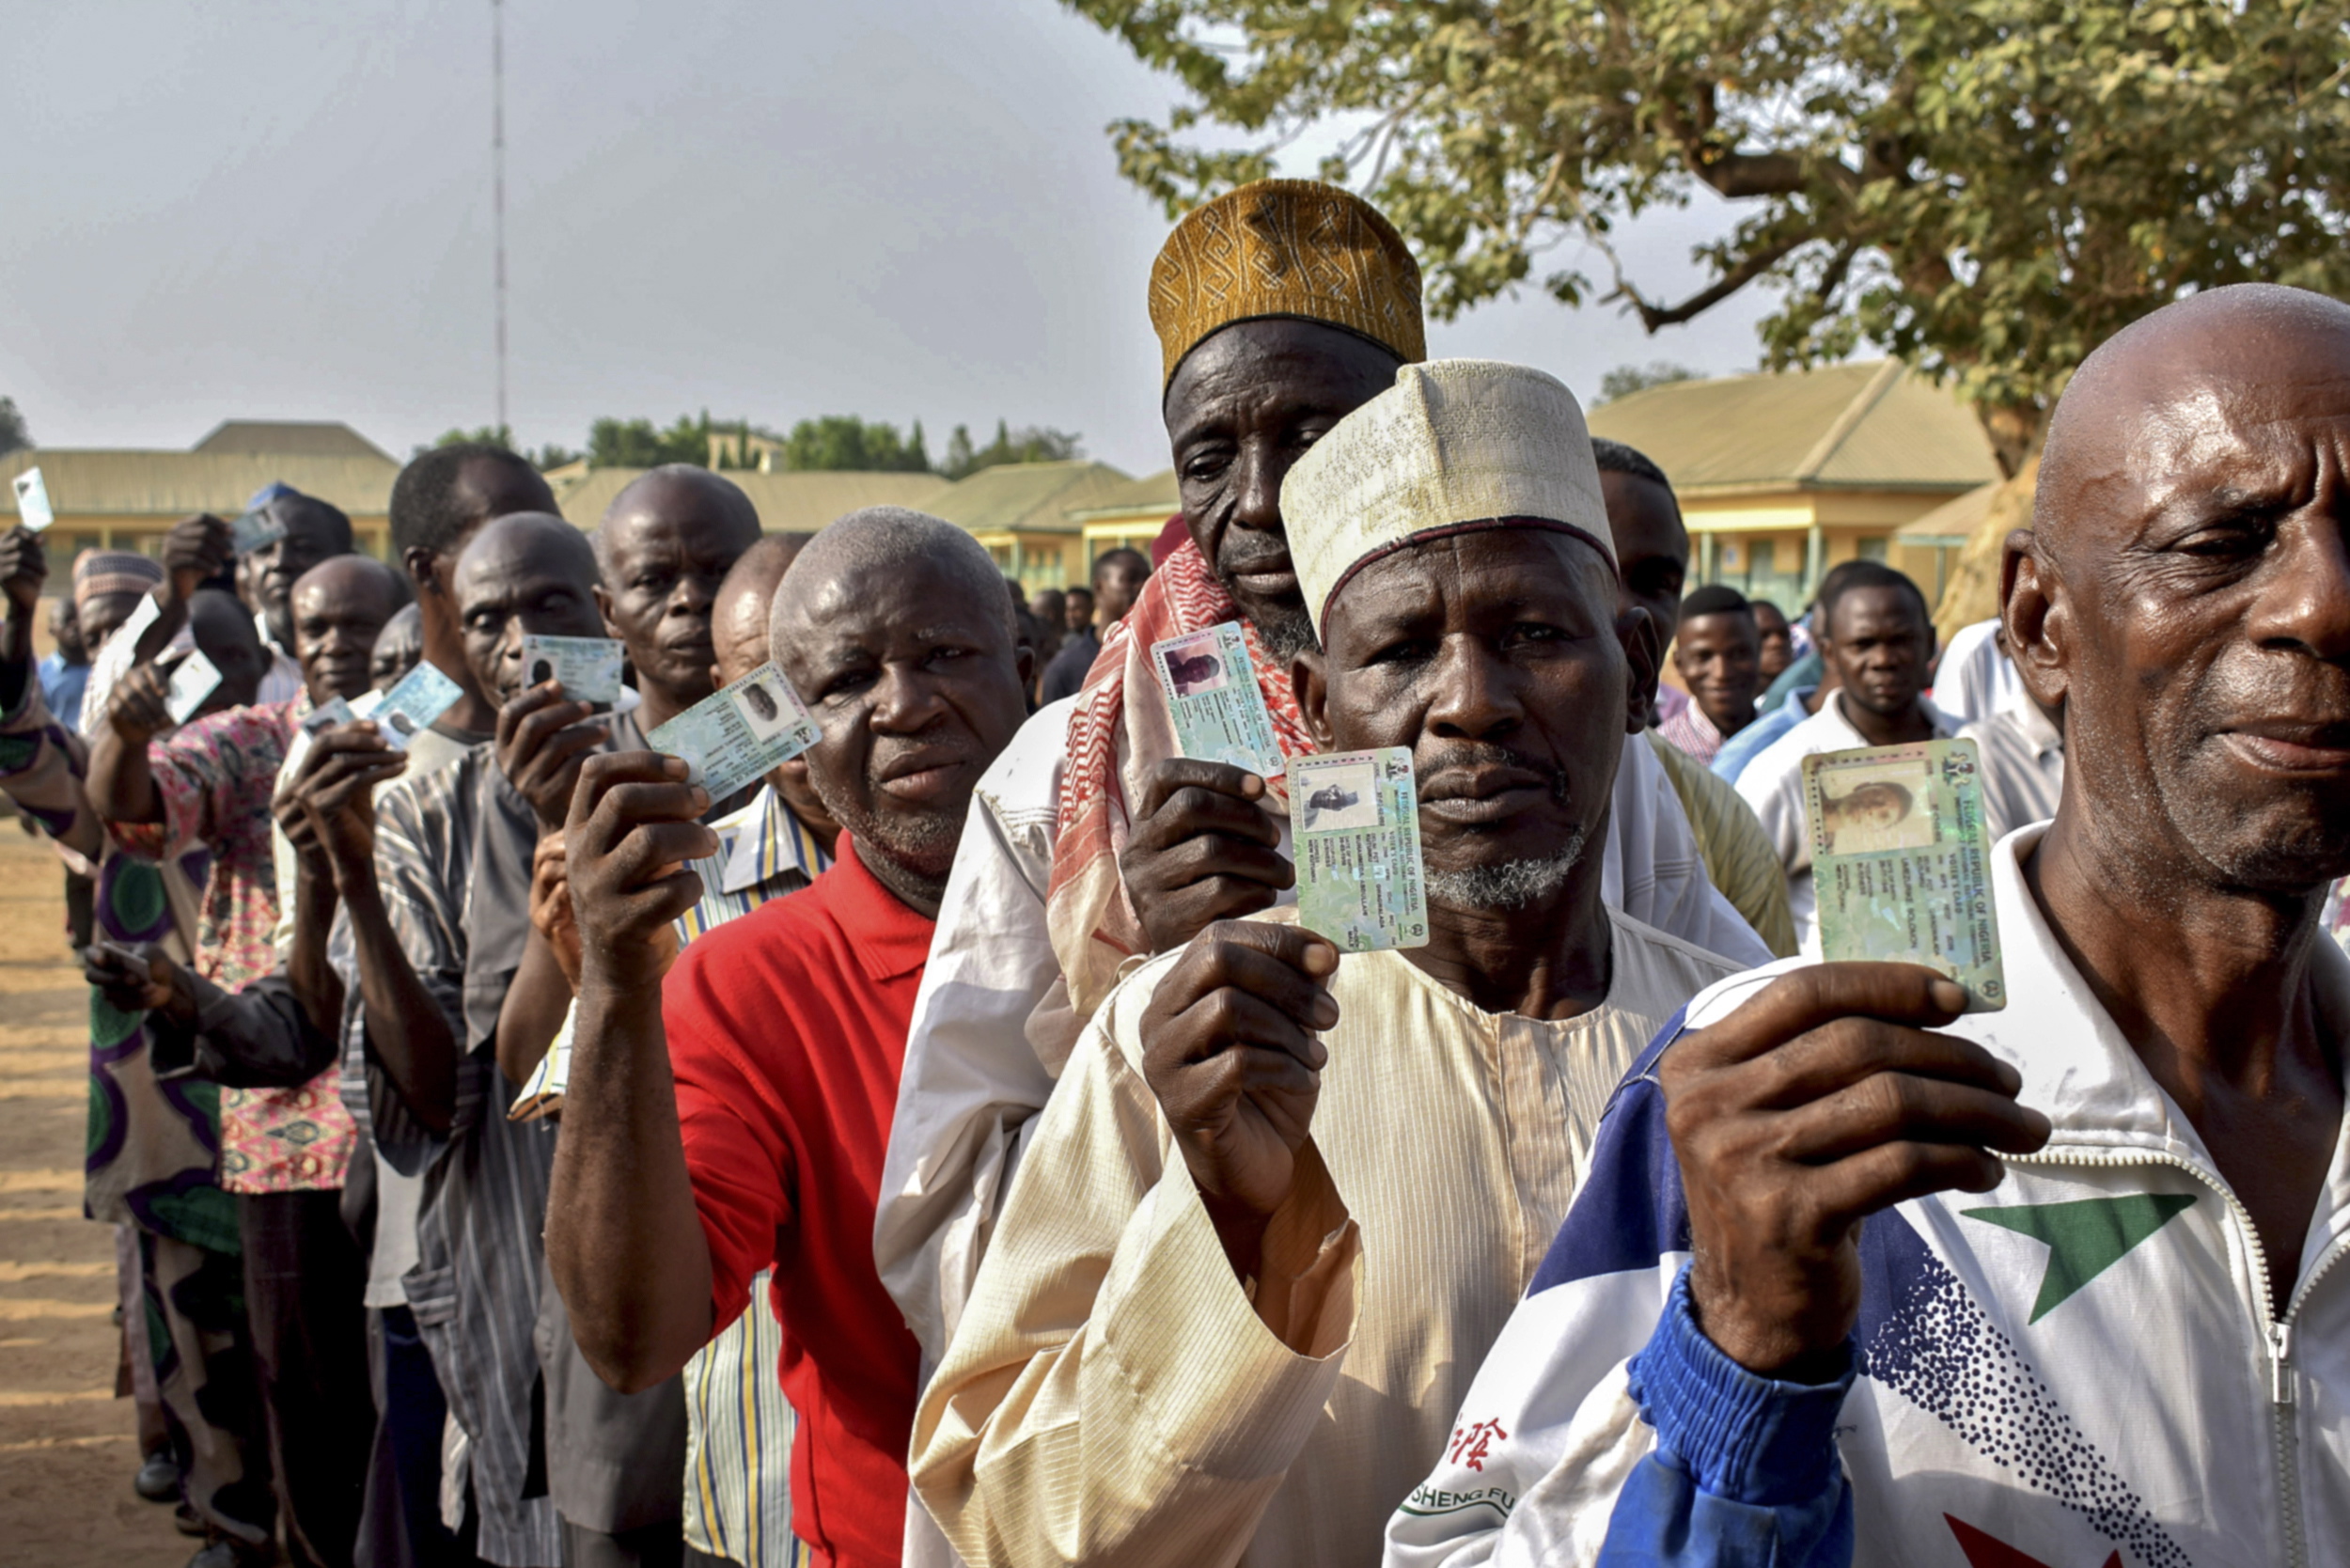 epa07389771 Nigerians display their voter cards as they line up to cast their ballots in the presidential elections in Abuja, Nigeria, 23 February 2019. Nigerians head to the polls to vote in the presidential and parliamentary elections after being delayed by one week by the Independent National Electoral Commission (INEC).  EPA/STR